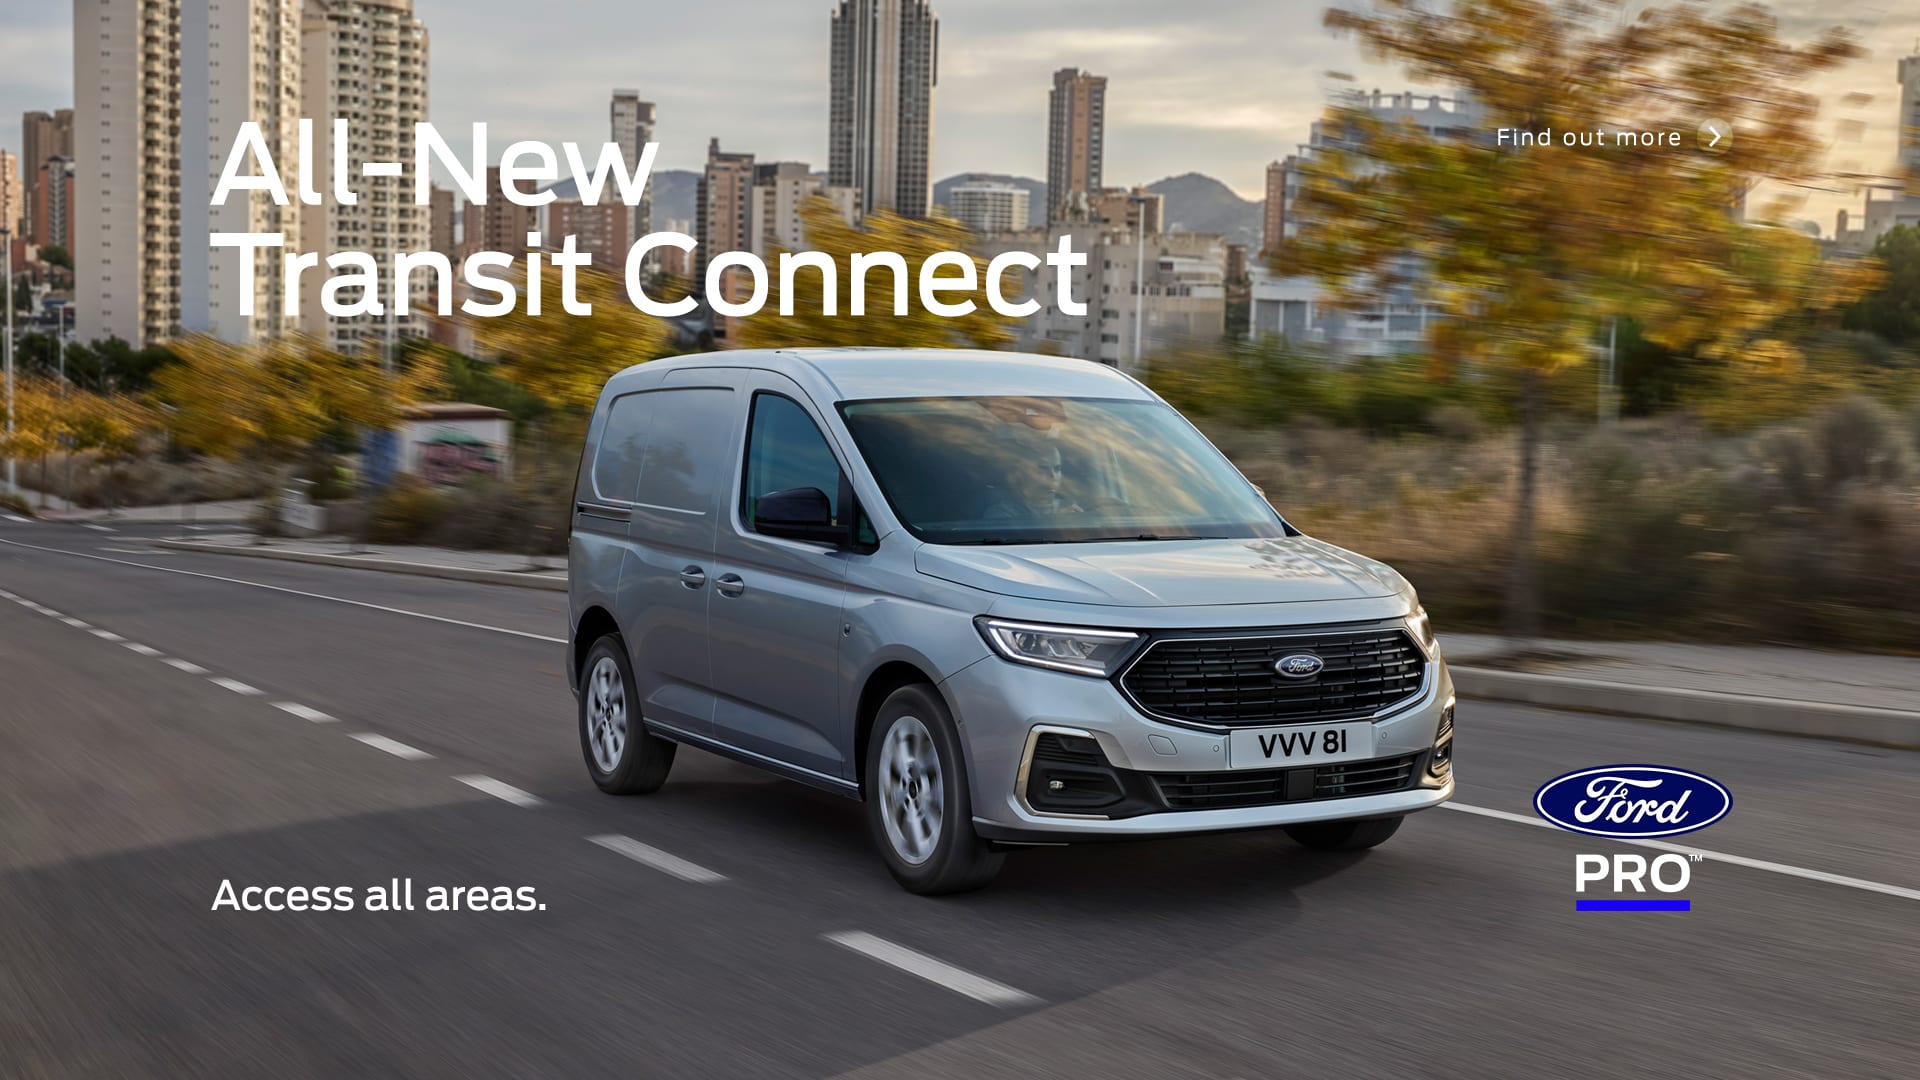 All New Ford Transit Connect